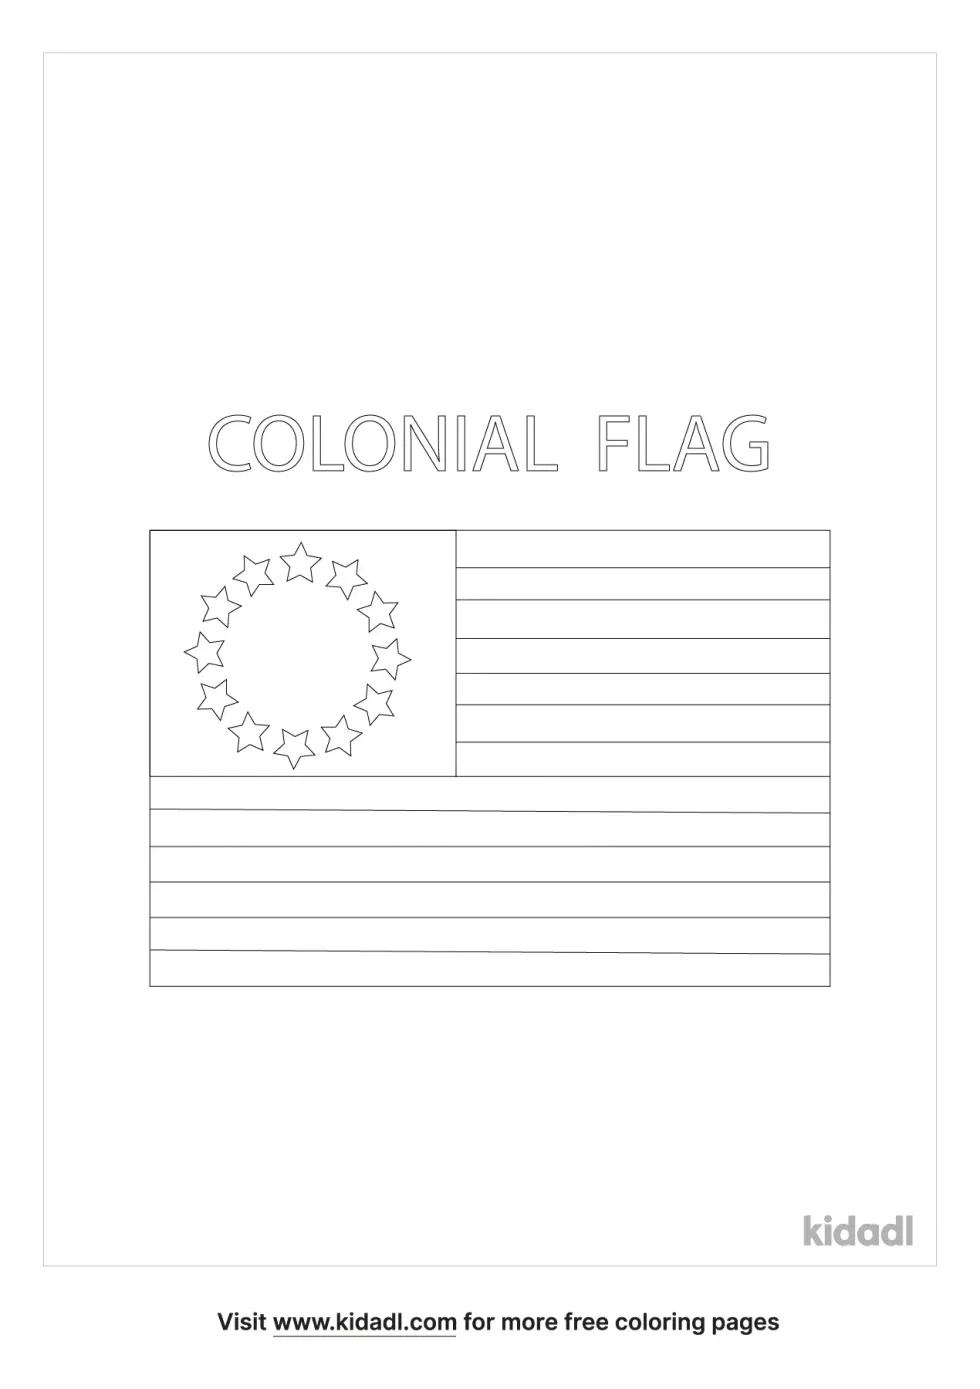 Colonial Picture Coloring Page